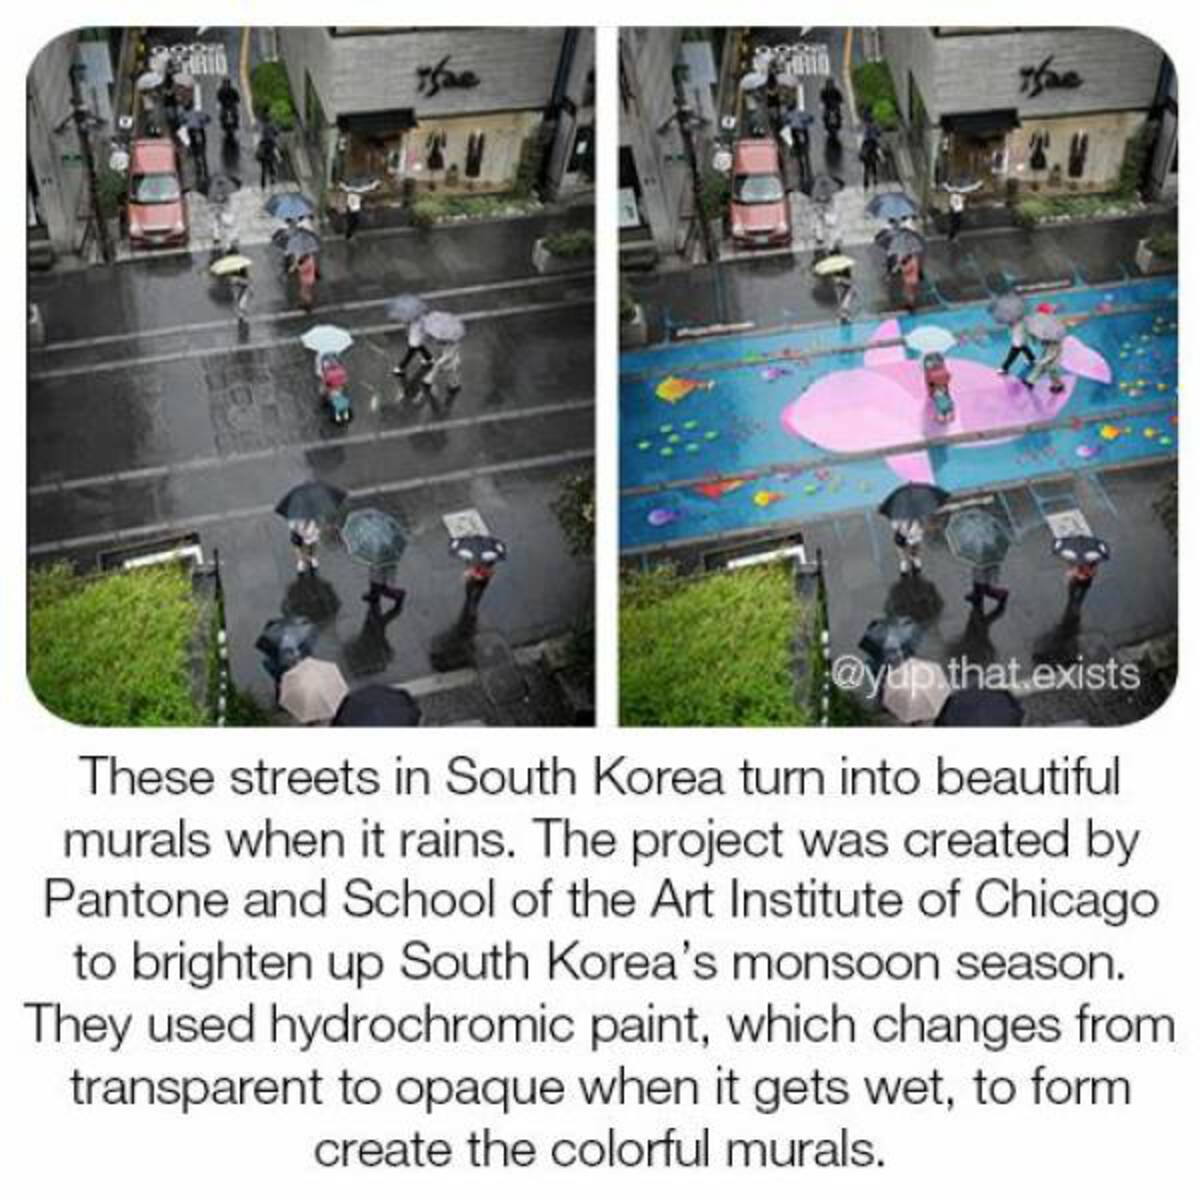 hydrochromic paint south korea - that.exists These streets in South Korea turn into beautiful murals when it rains. The project was created by Pantone and School of the Art Institute of Chicago to brighten up South Korea's monsoon season. They used hydroc